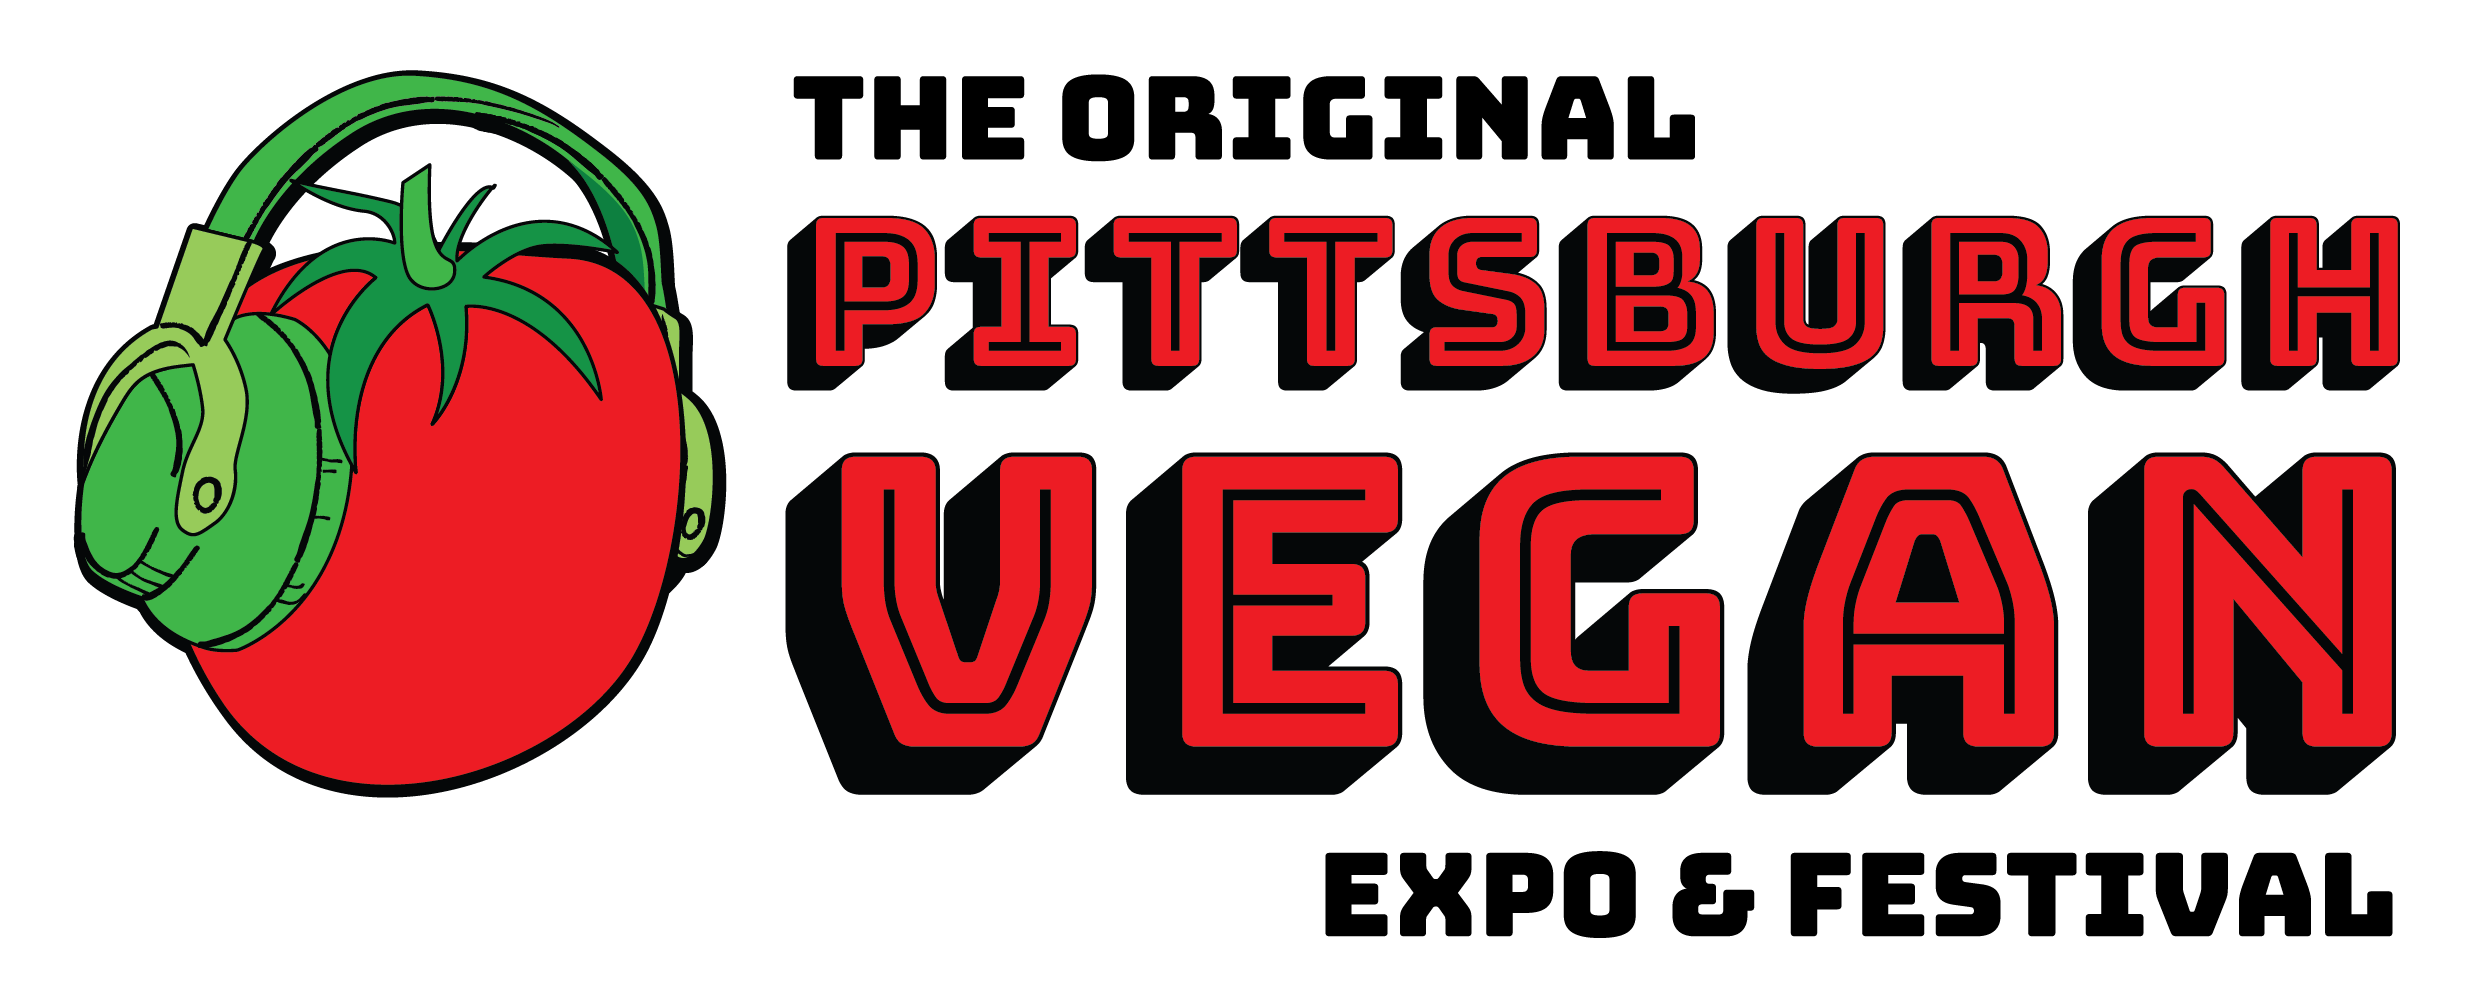 Pittsburgh Vegan Festival and Expo